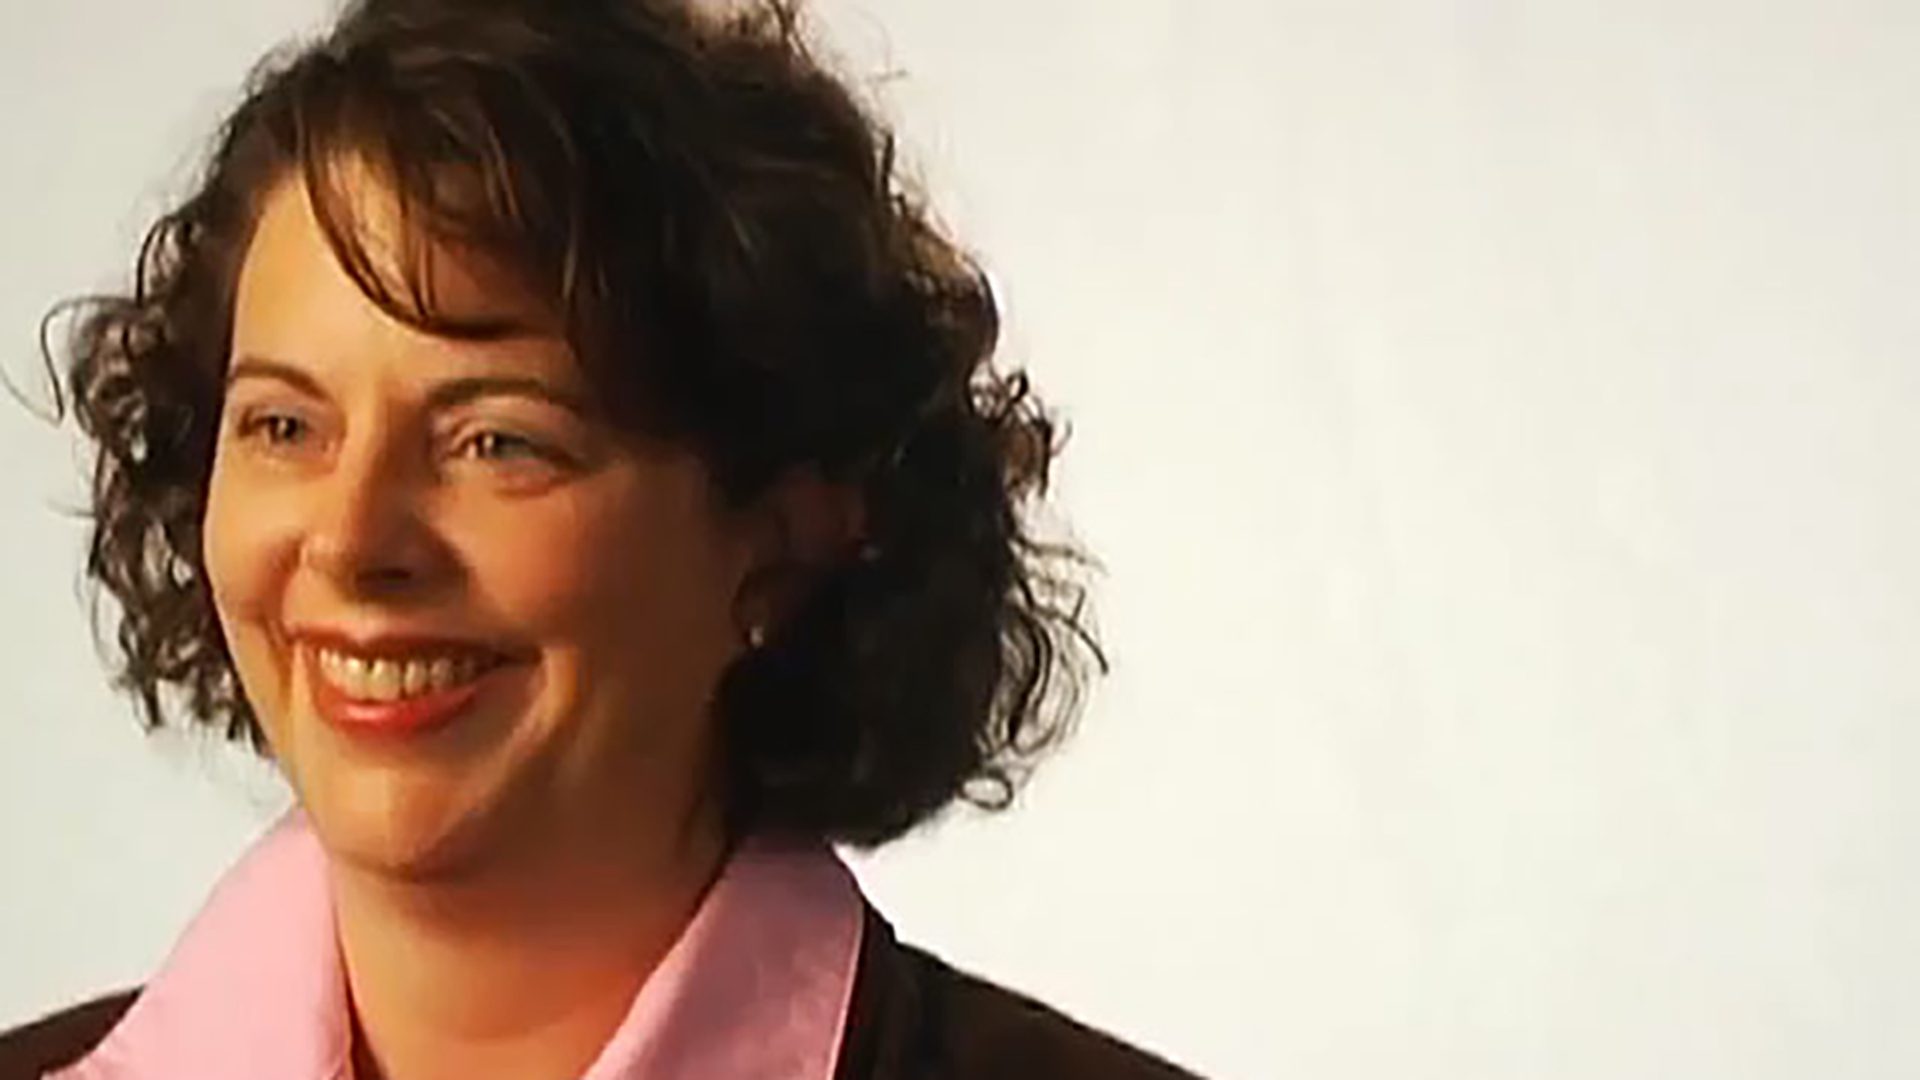 A woman with short, dark, curly hair wears a light pink and brown shirt and is interviewed against a white background.